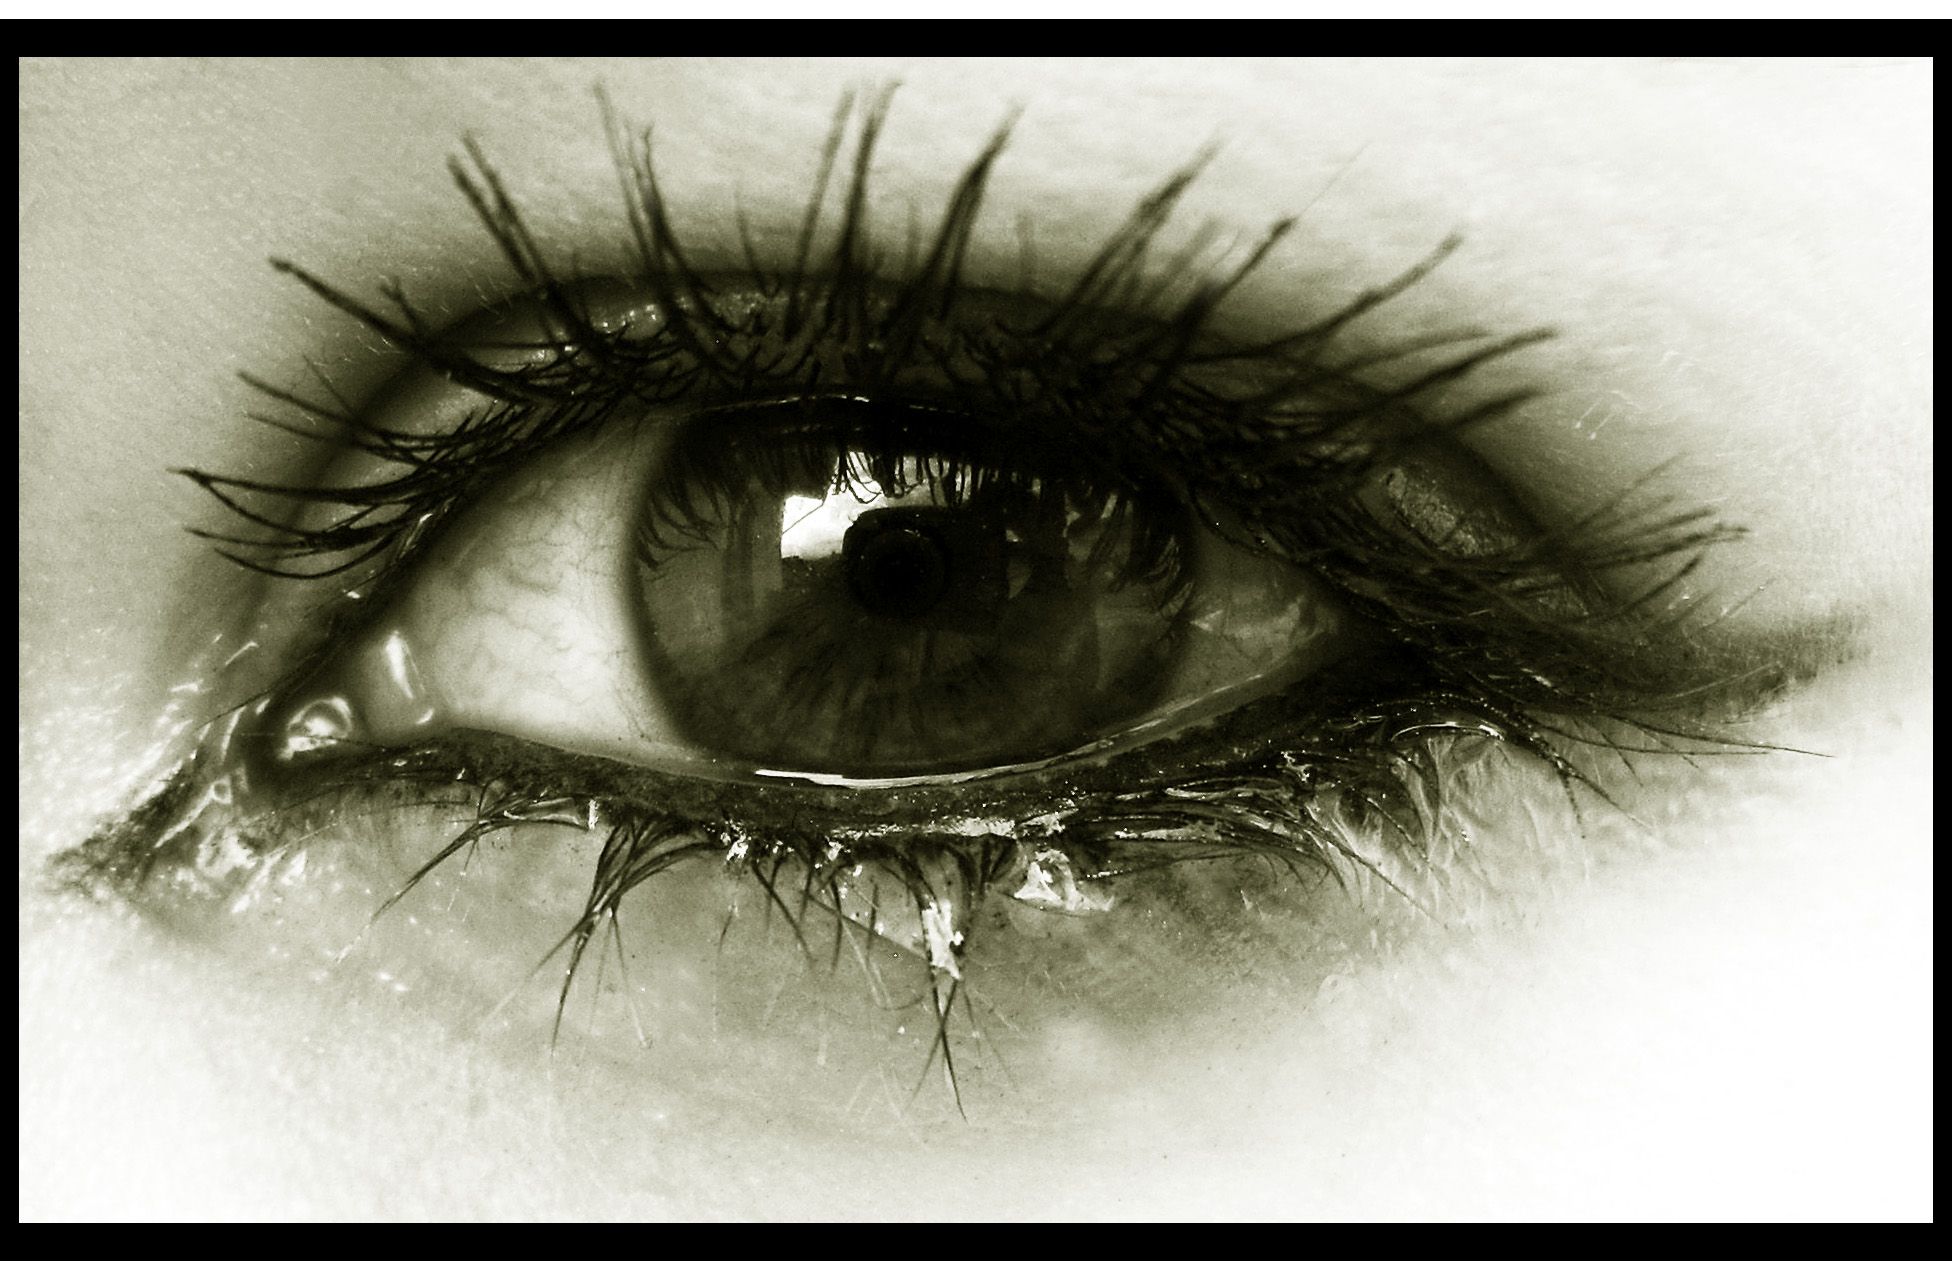 Crying Eyes HD Wallpaper One Cares For My Tears HD Wallpaper